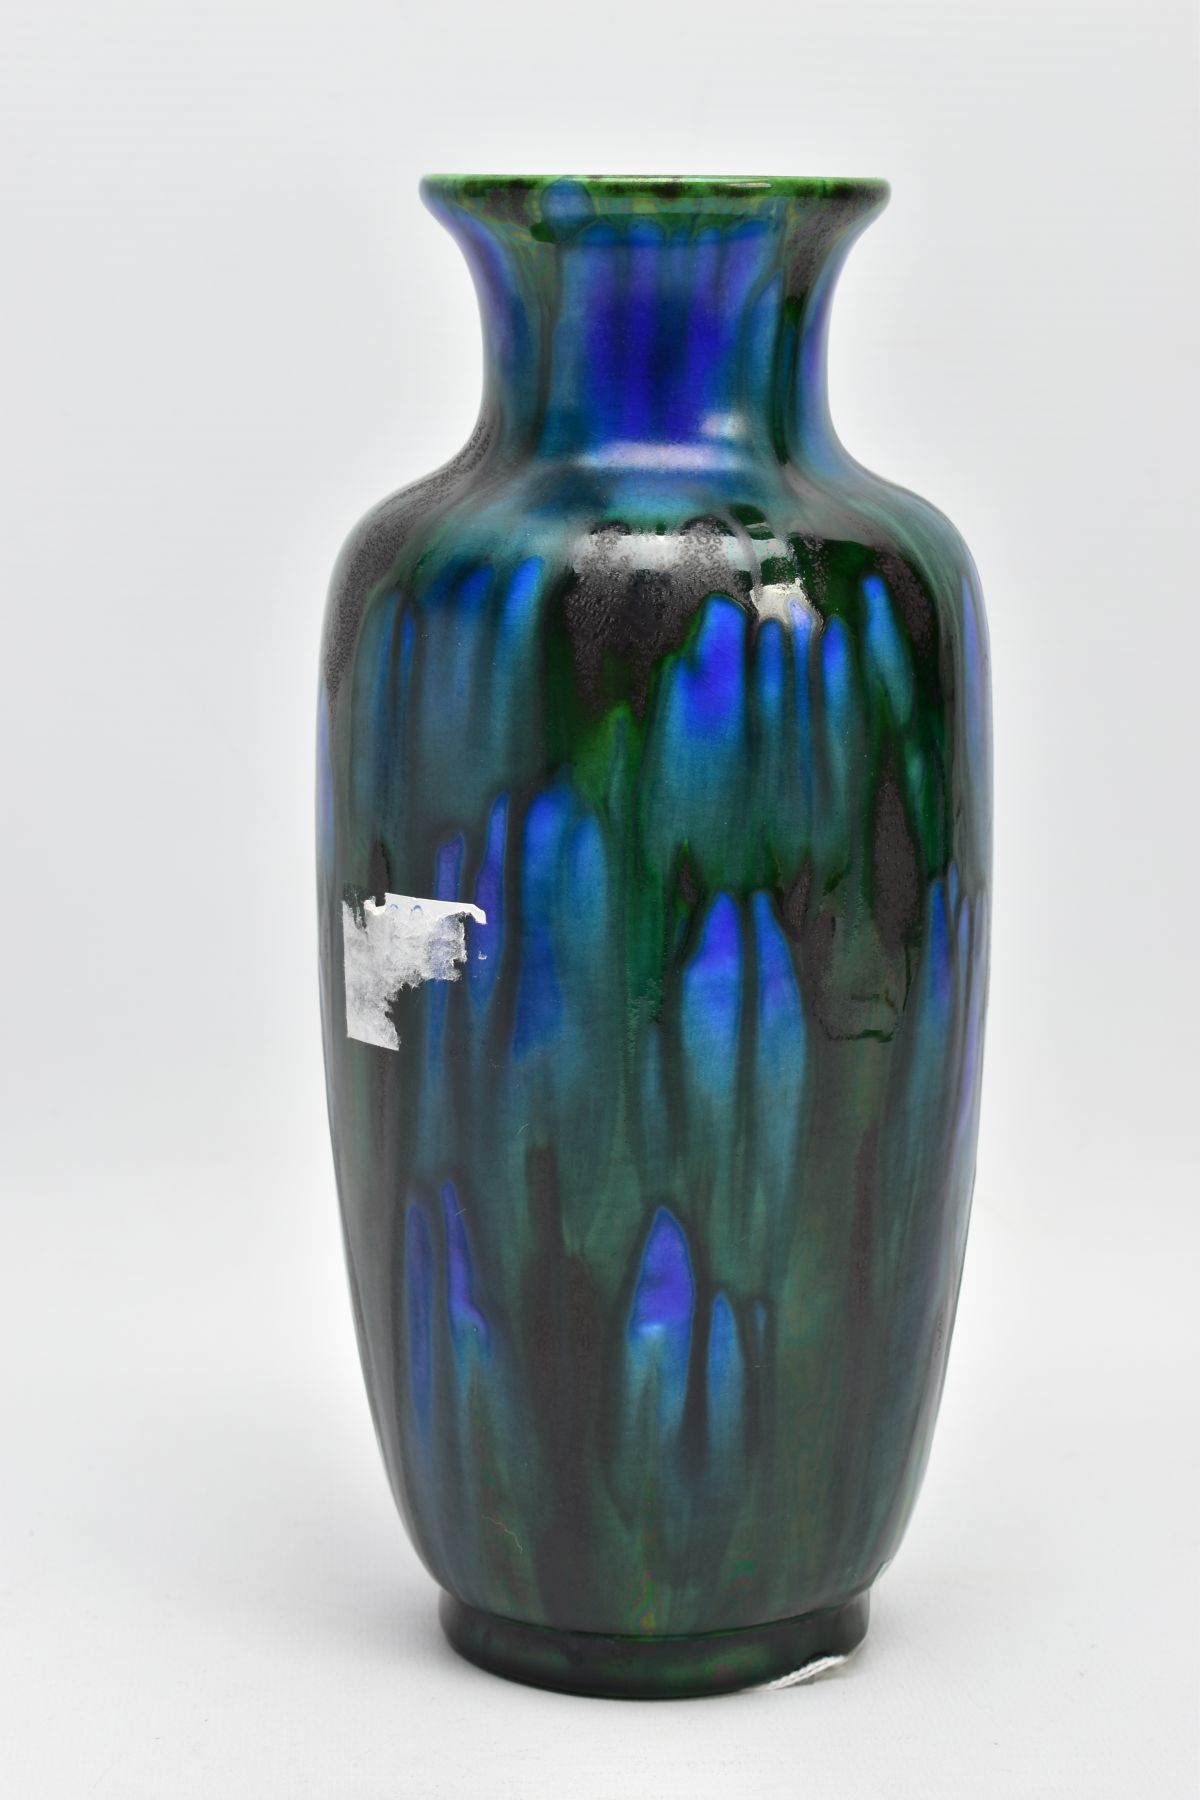 A MINTONS ASTRAWARE VASE, glazed in streaky blue and green, printed factory mark, height 10.5cm - Image 3 of 5